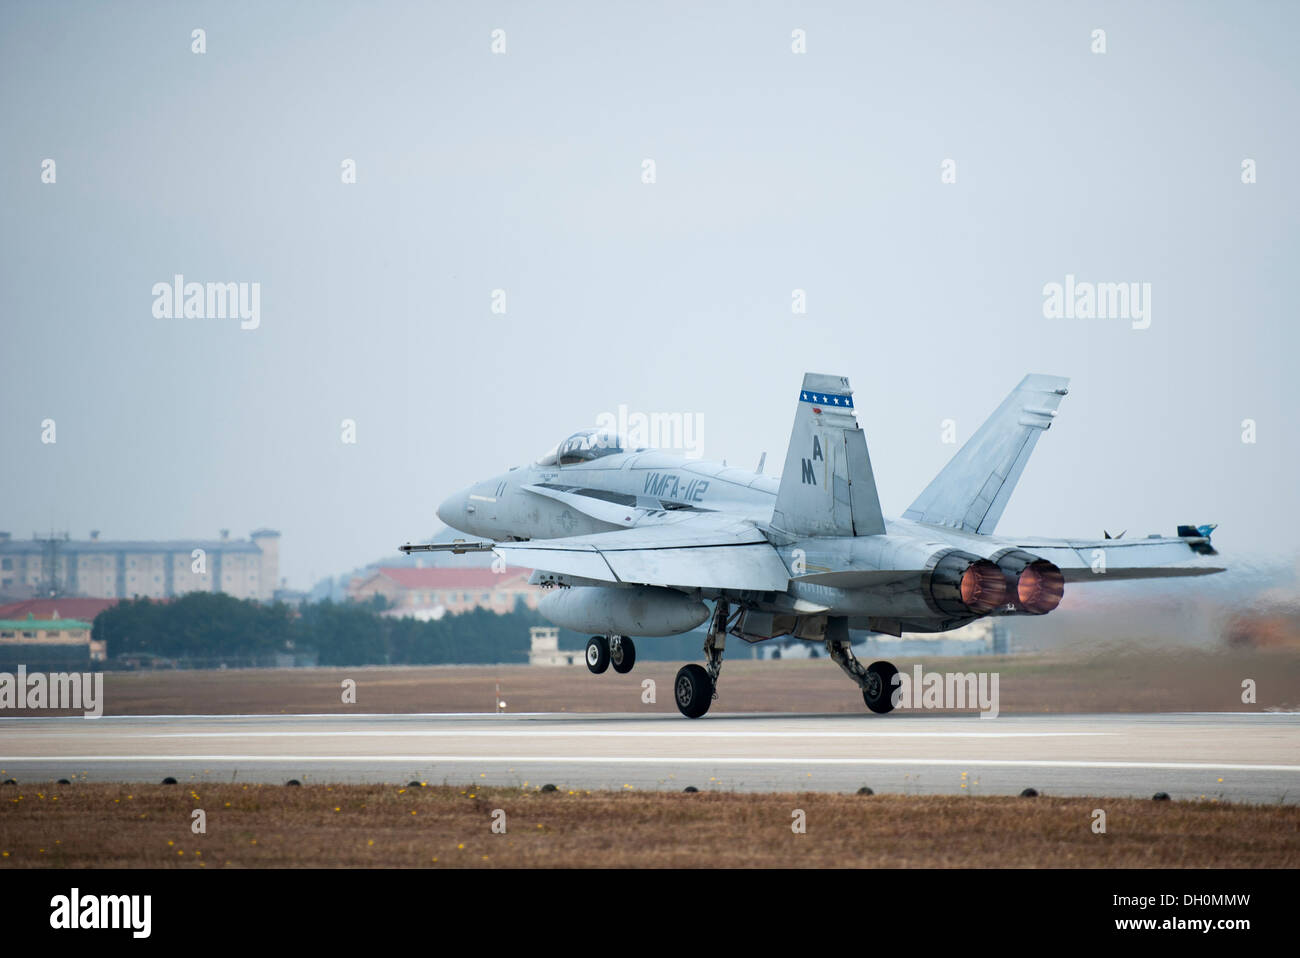 New Photo 6 Sizes! U.S Marine Corps F/A-18 Hornet Fighter Jet Aircraft